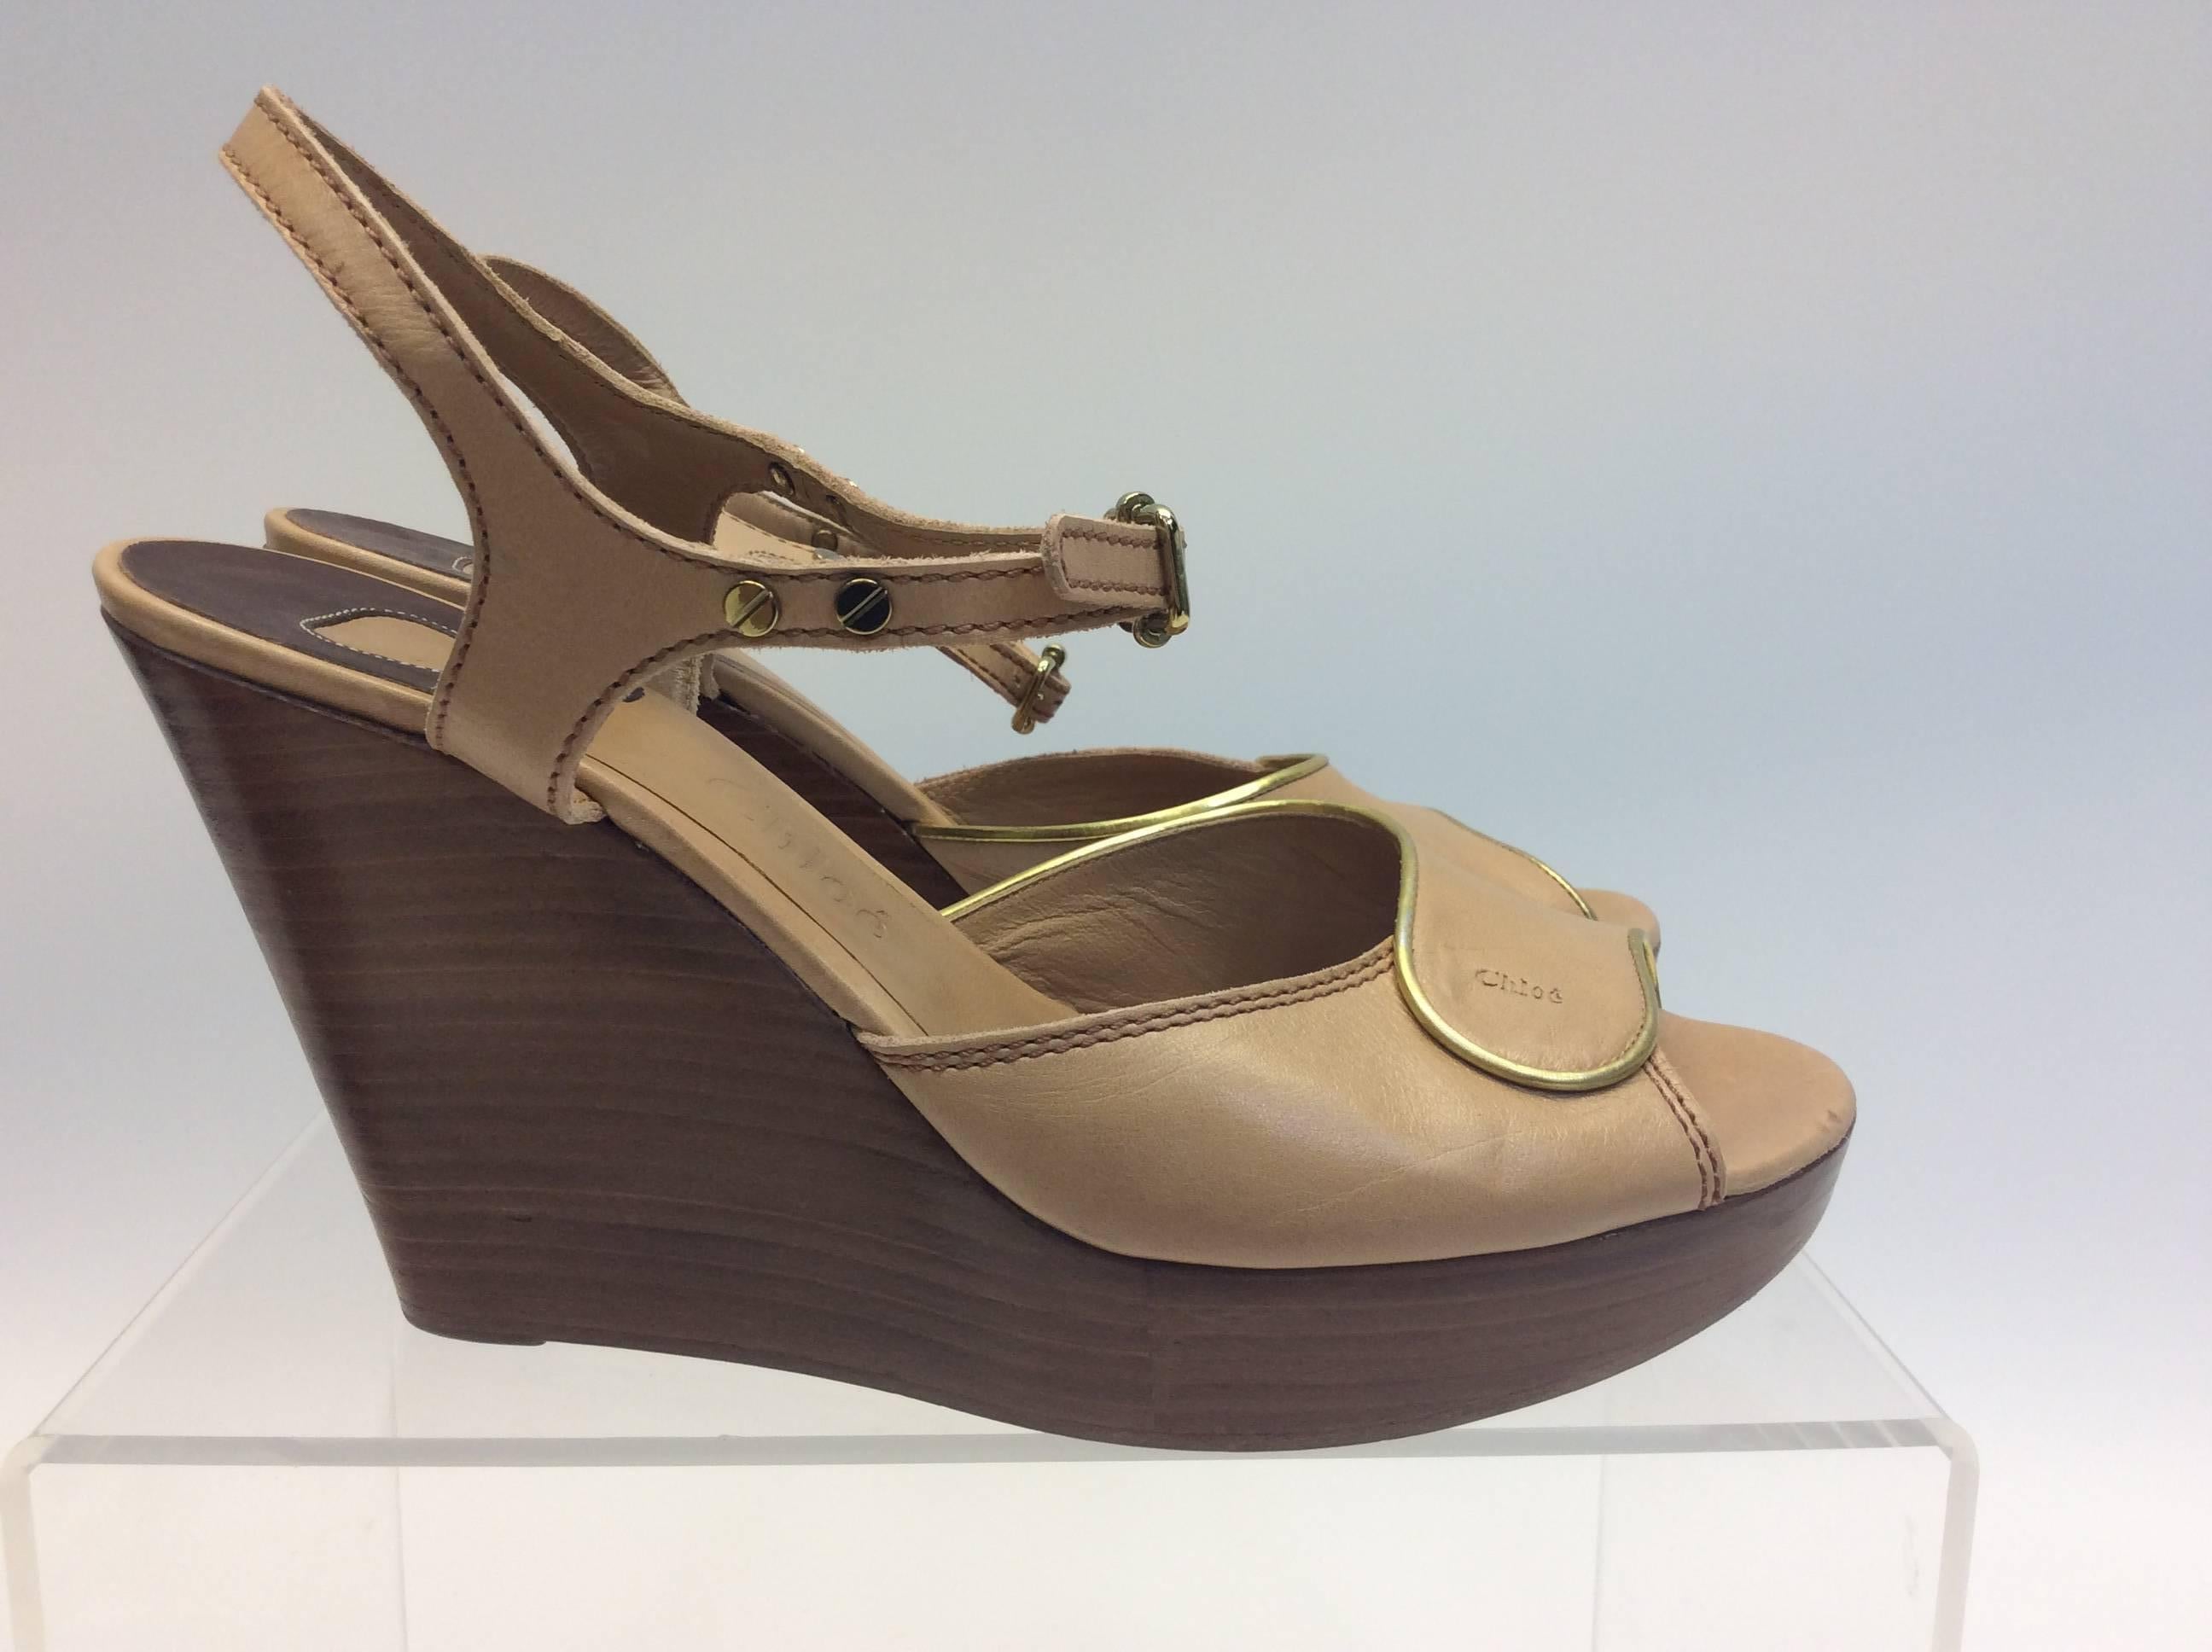 Chloe Tan Leather Wedge In Good Condition For Sale In Narberth, PA